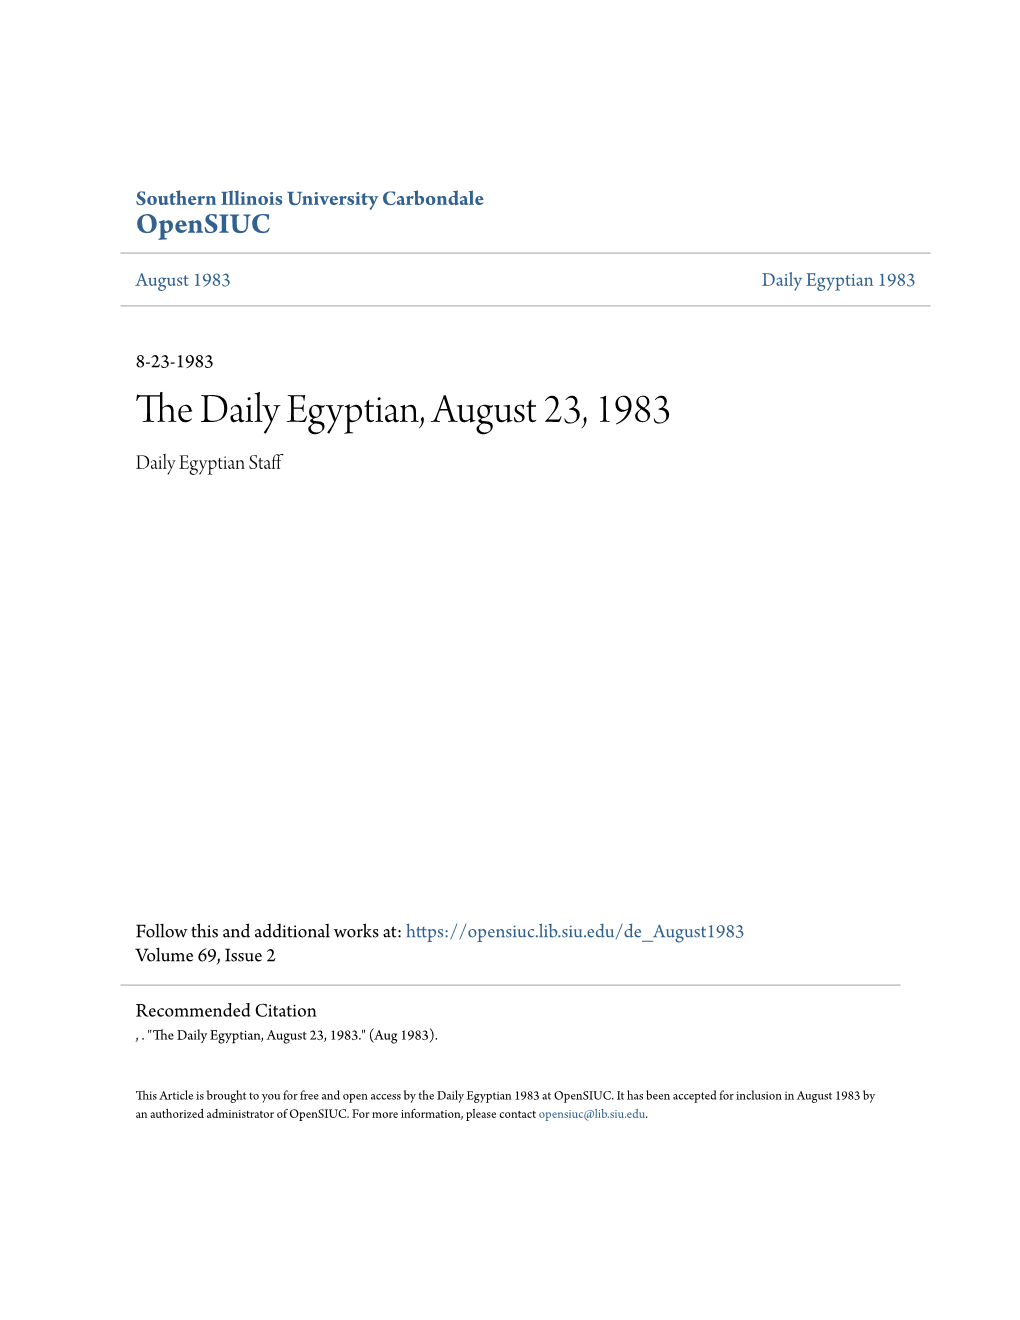 The Daily Egyptian, August 23, 1983